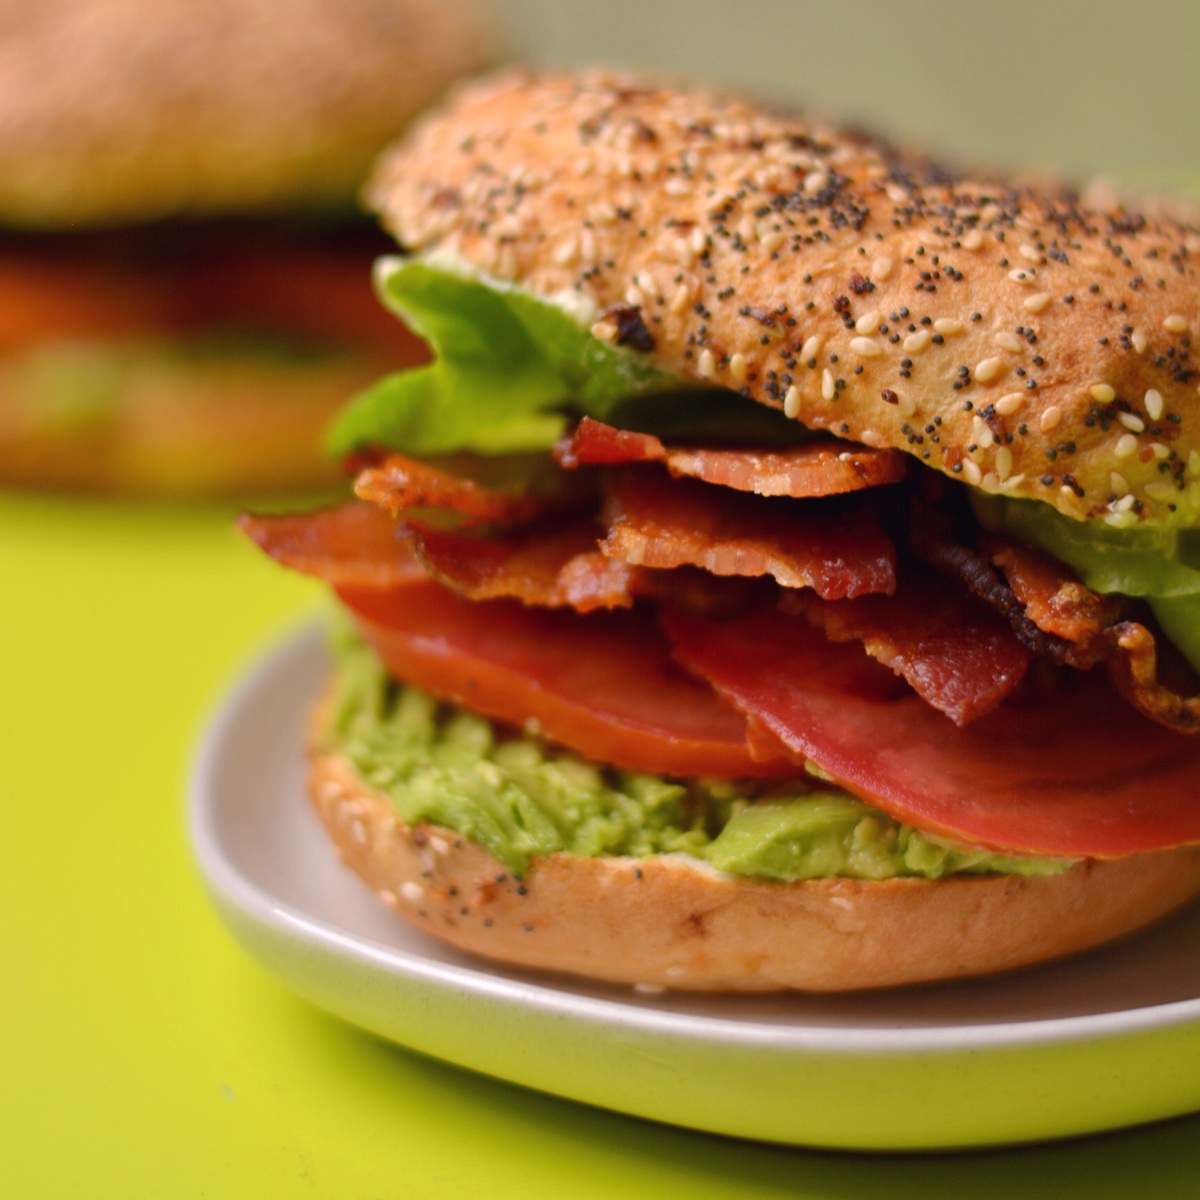 A bagel blt showing bacon and other layers.